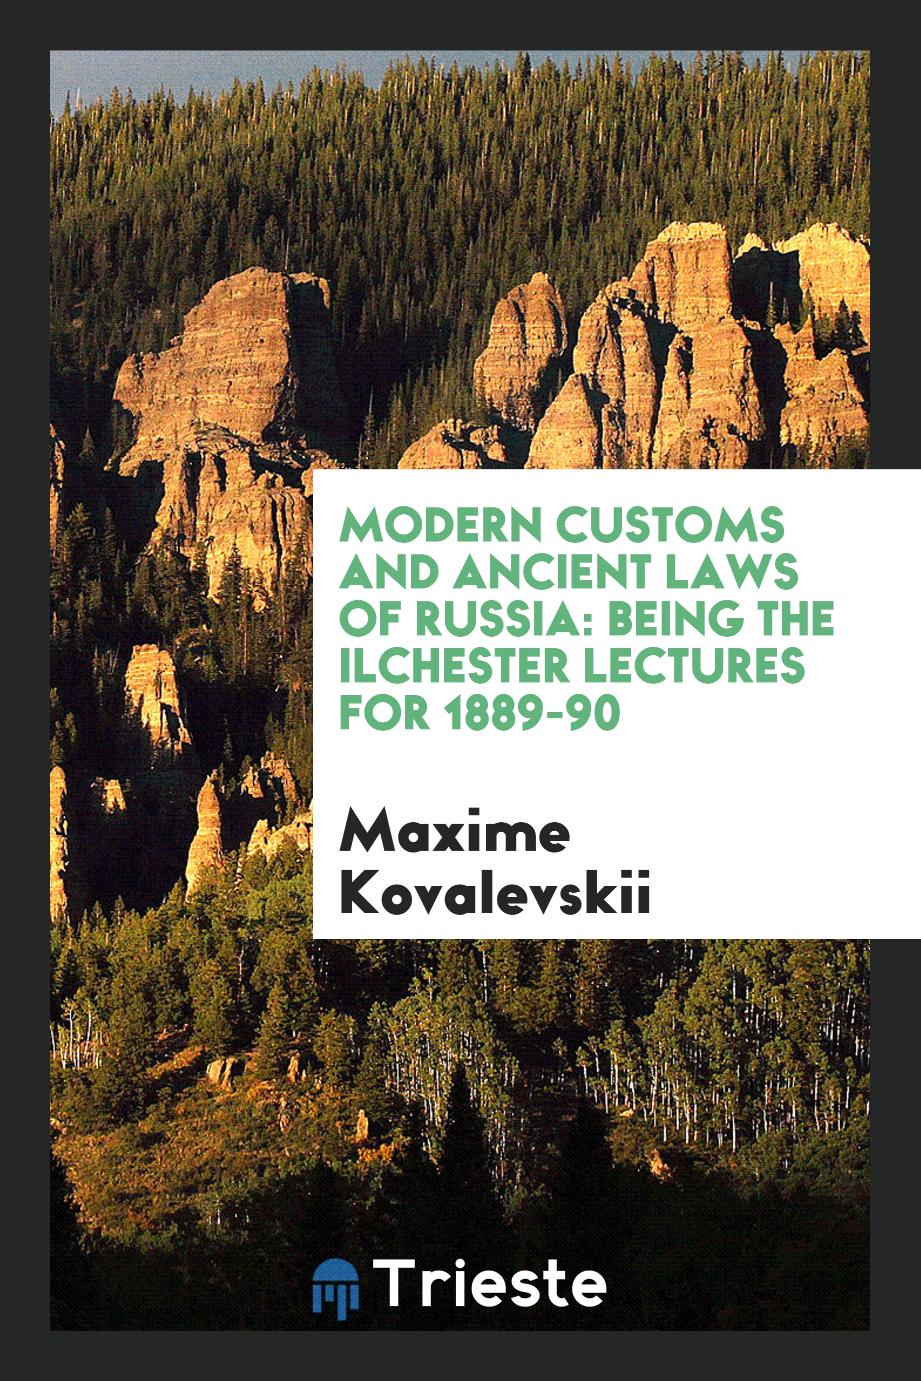 Maxime Kovalevskii - Modern customs and ancient laws of Russia: being the Ilchester lectures for 1889-90